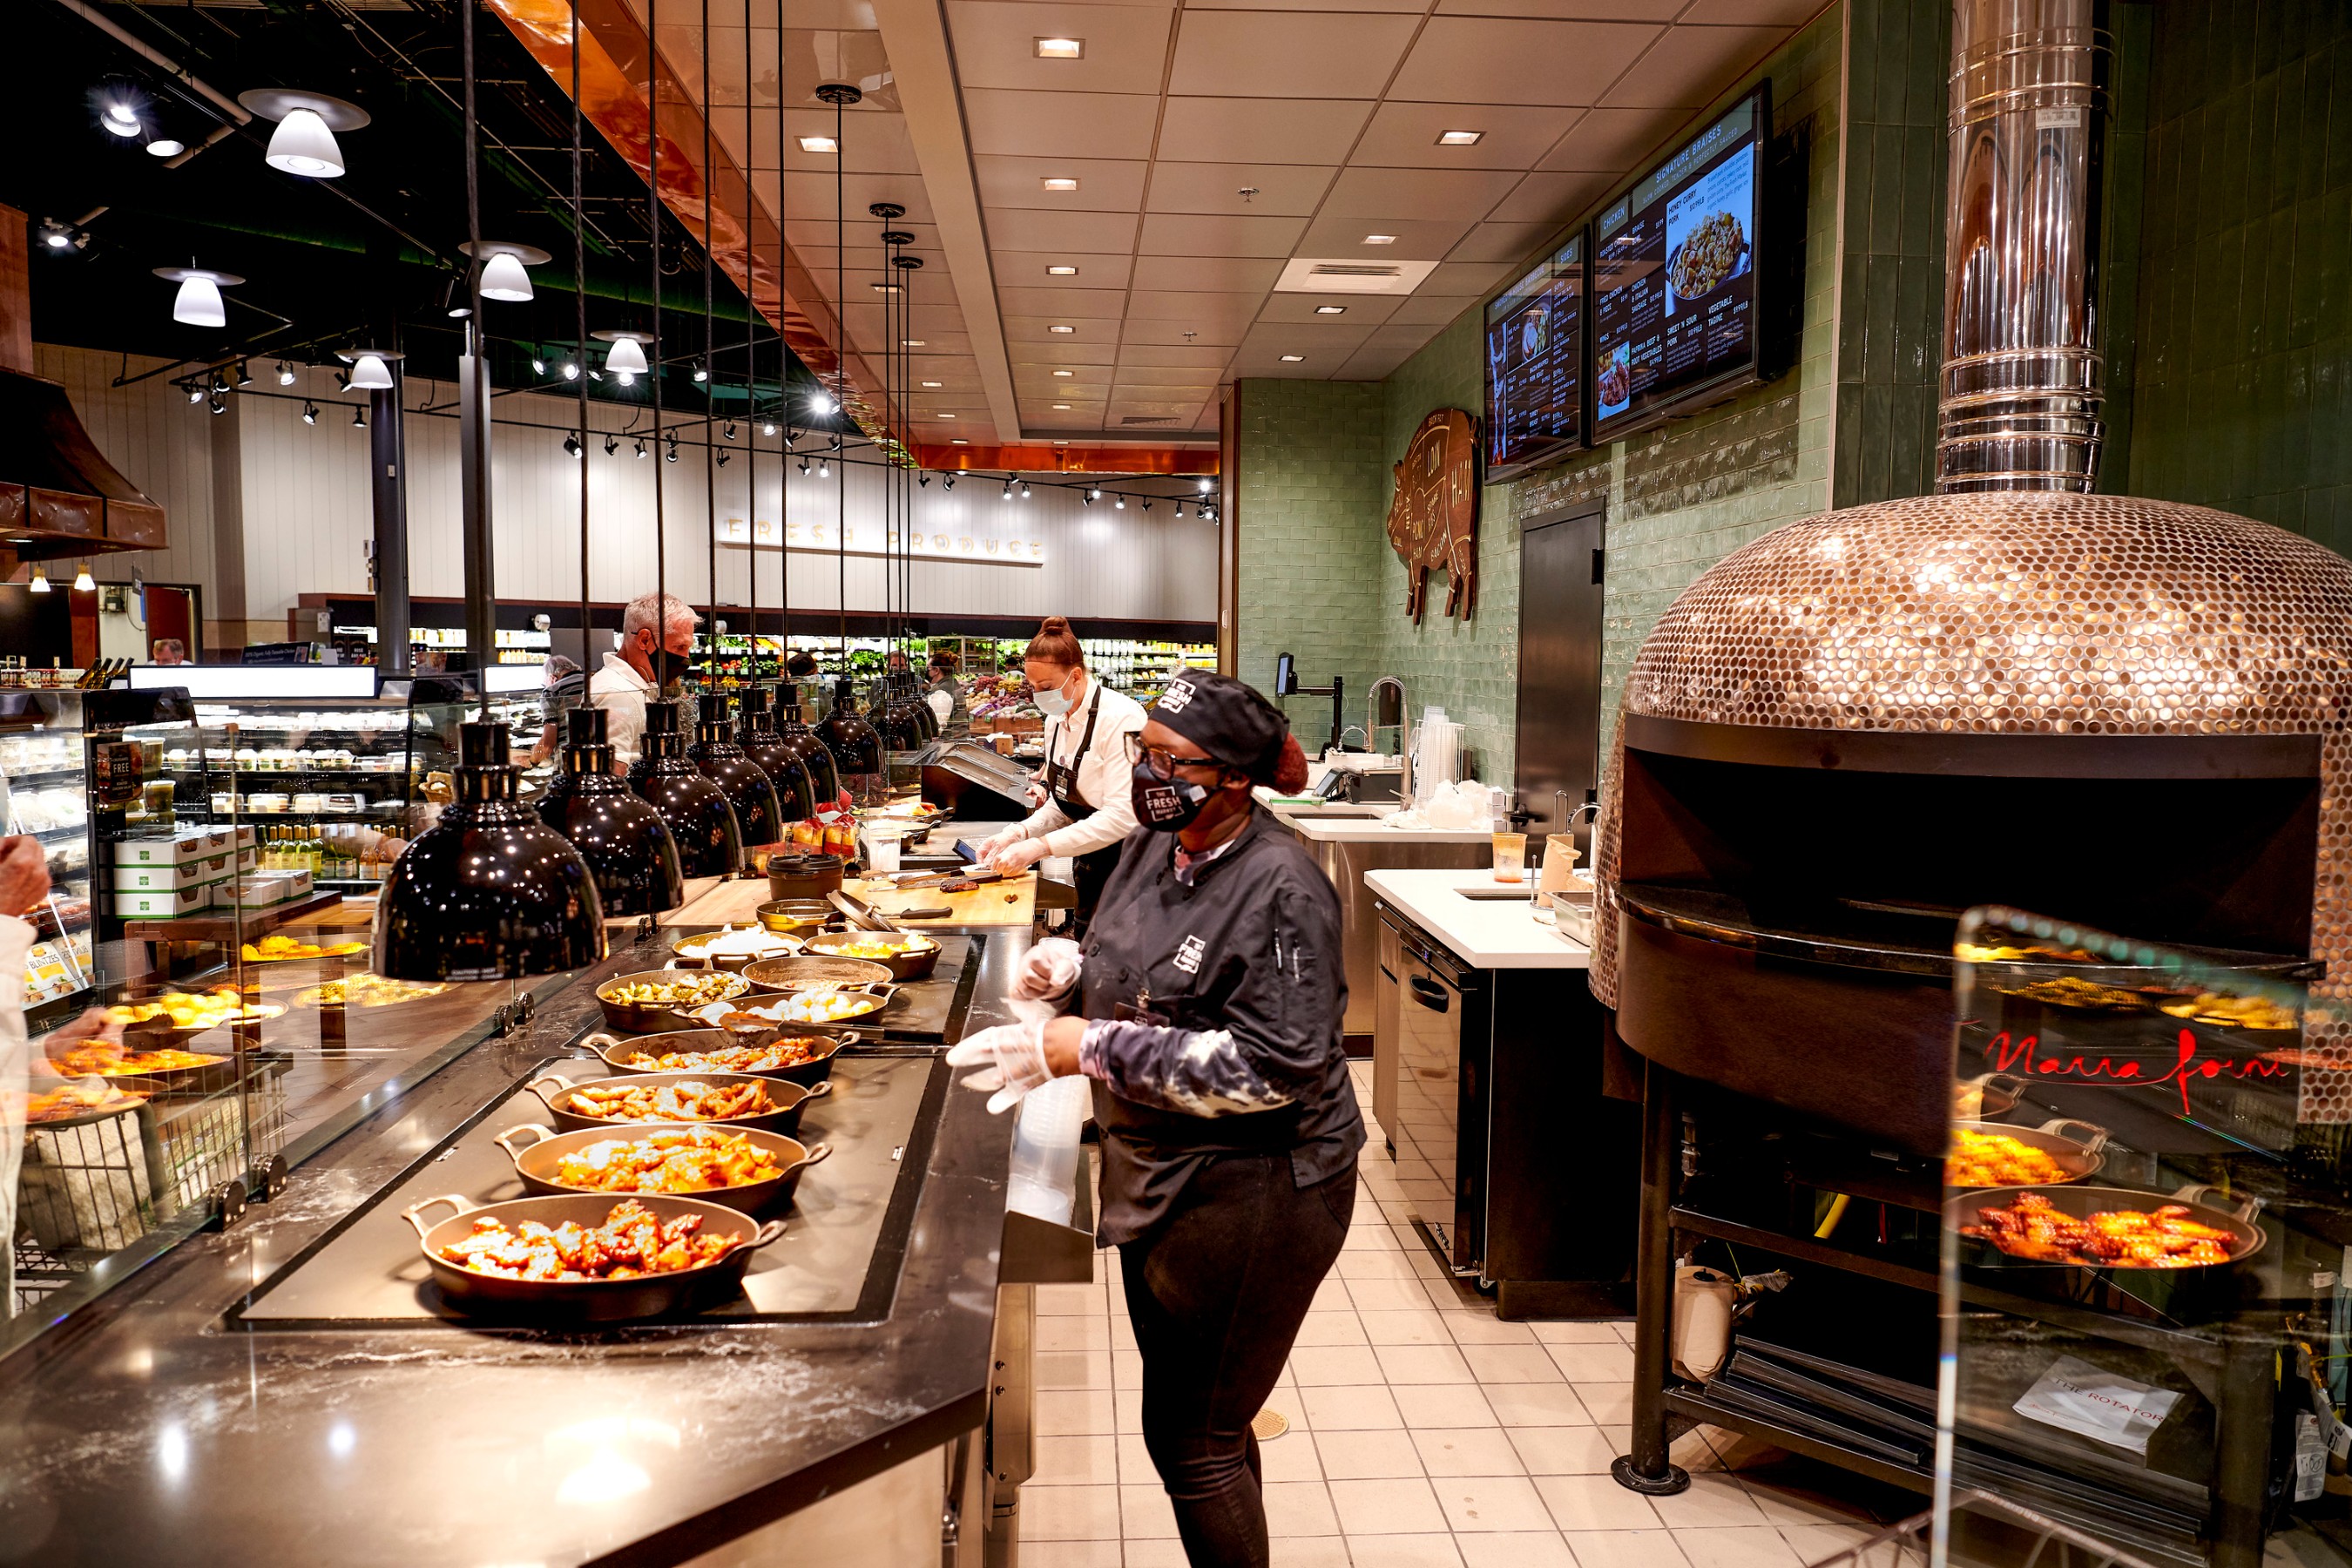 Smoked-in-house BBQ and Brick Oven Pizzas are on the menu at The Fresh Market, 3712 Lawndale in Greensboro, NC.